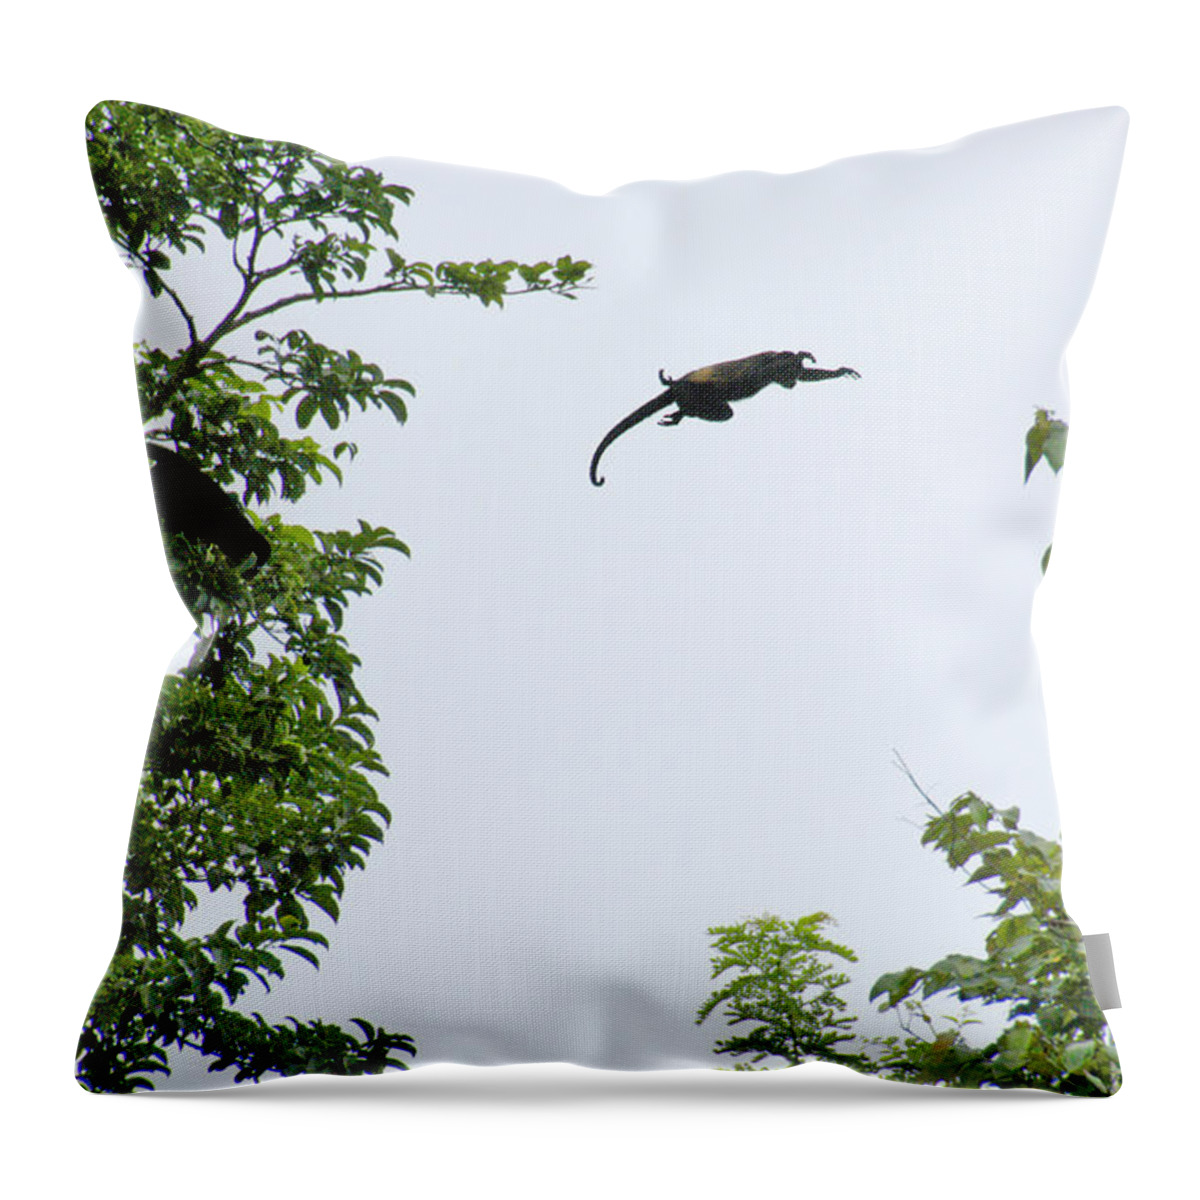 Monkey Throw Pillow featuring the photograph Leaping Monkey by Ted Keller